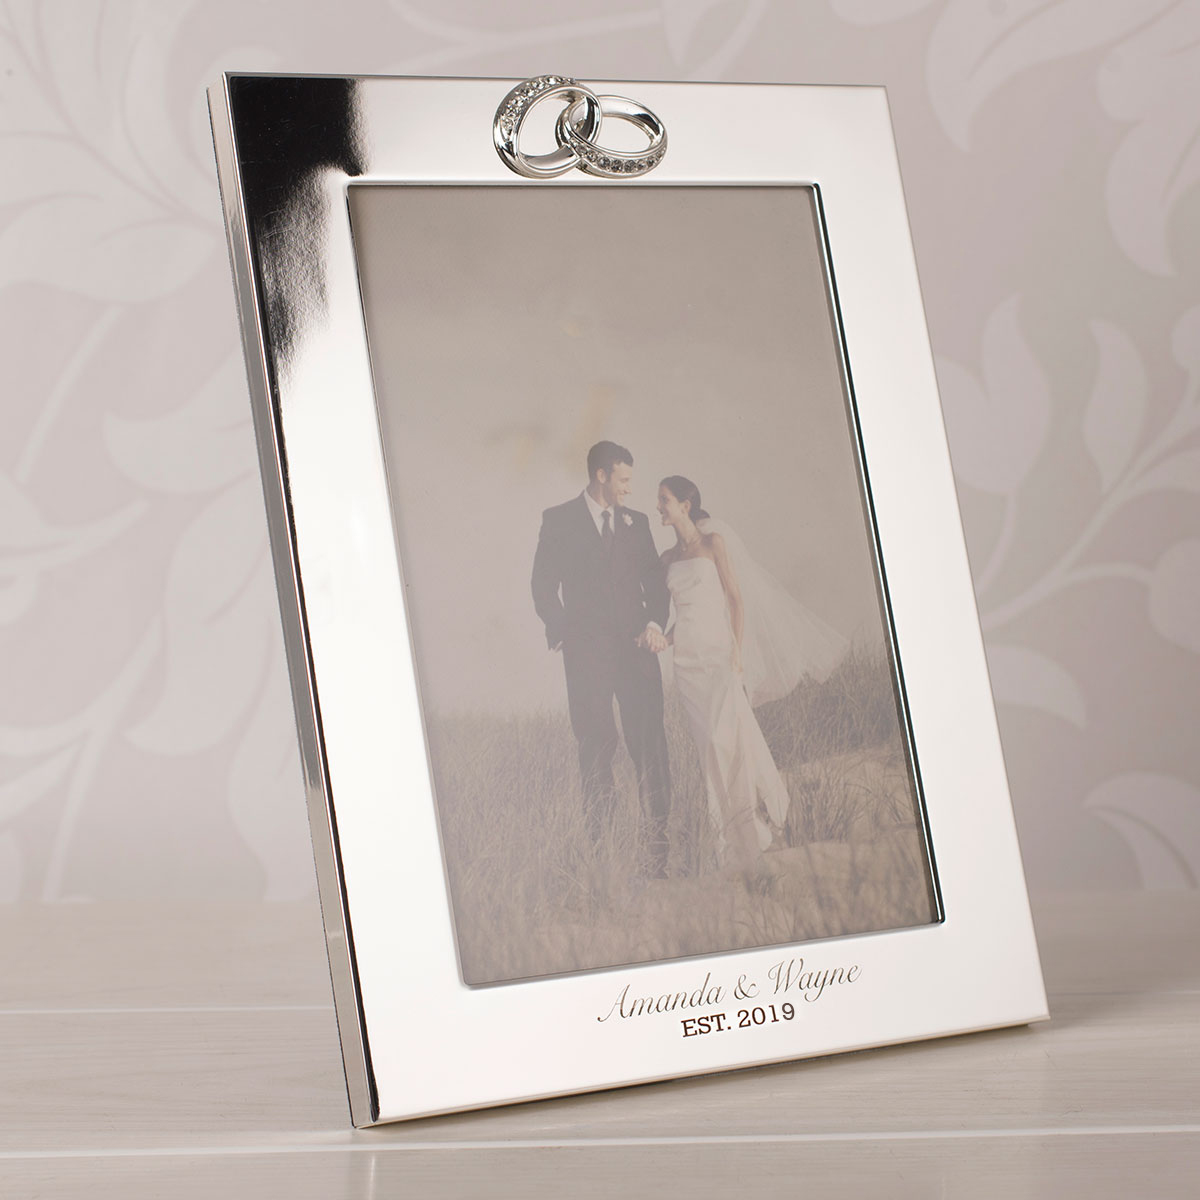 Engraved Silver-Plated Wedding Photo Frame with Crystal Rings